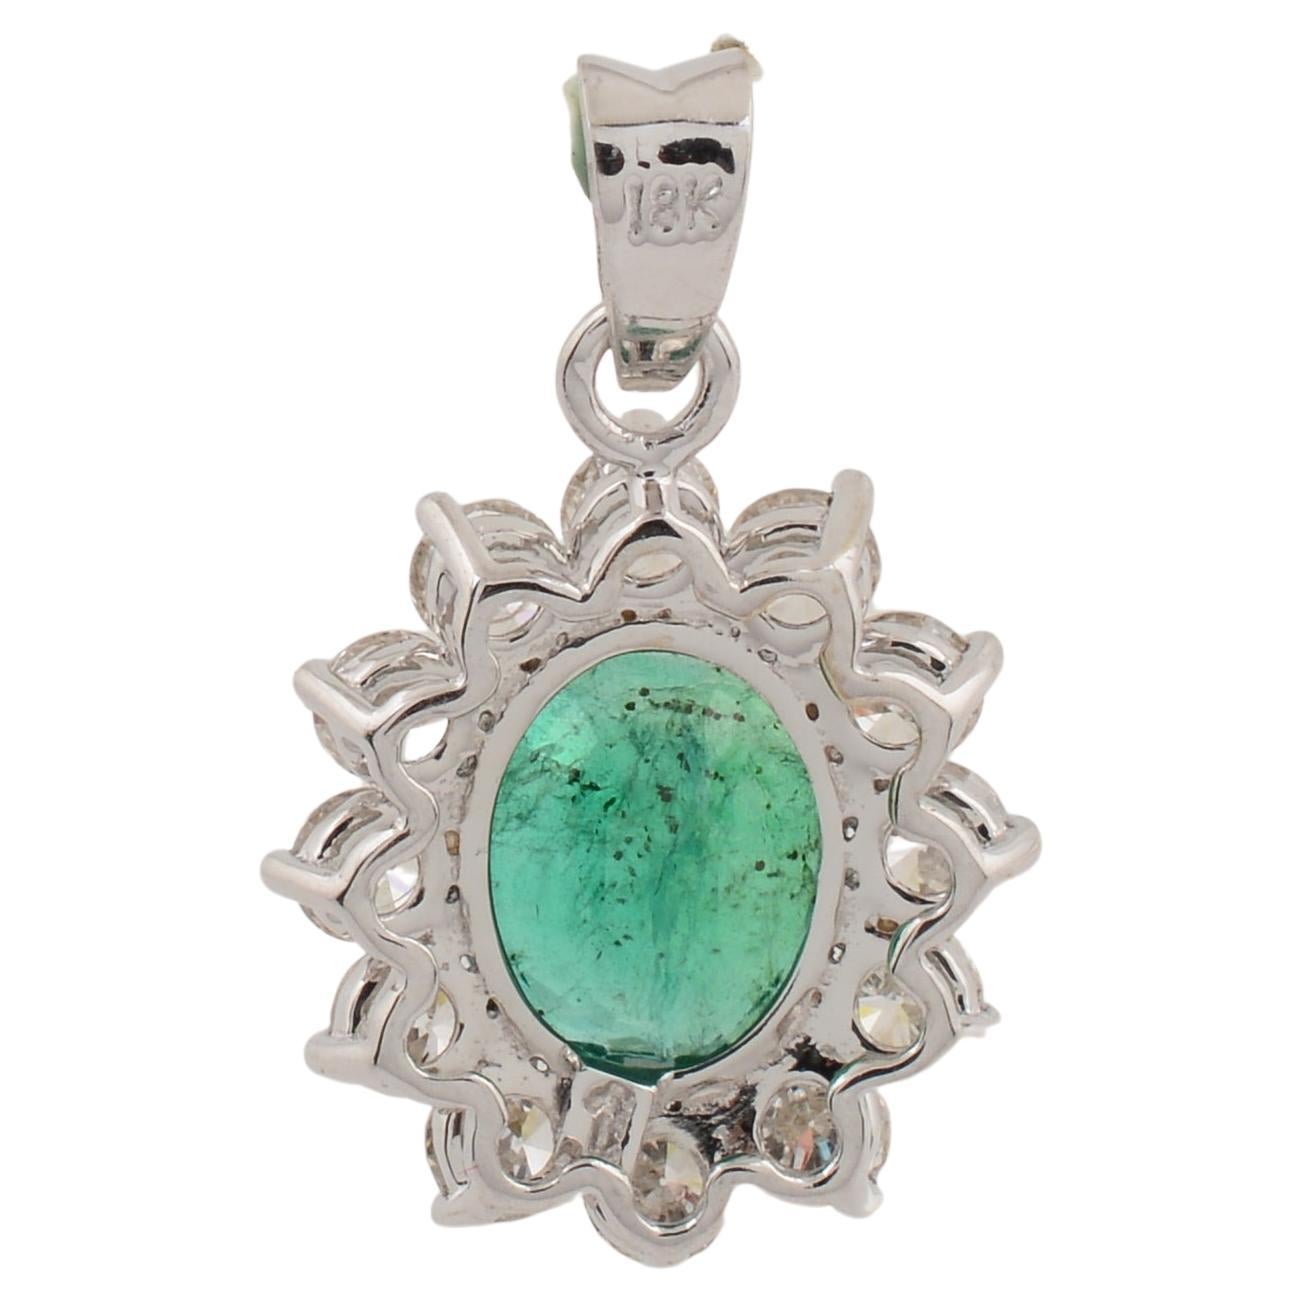 The centerpiece of this pendant is the natural emerald gemstone, known for its rich green color and timeless beauty. Emerald is carefully selected for its exceptional quality and unique characteristics, ensuring a striking and eye-catching presence.